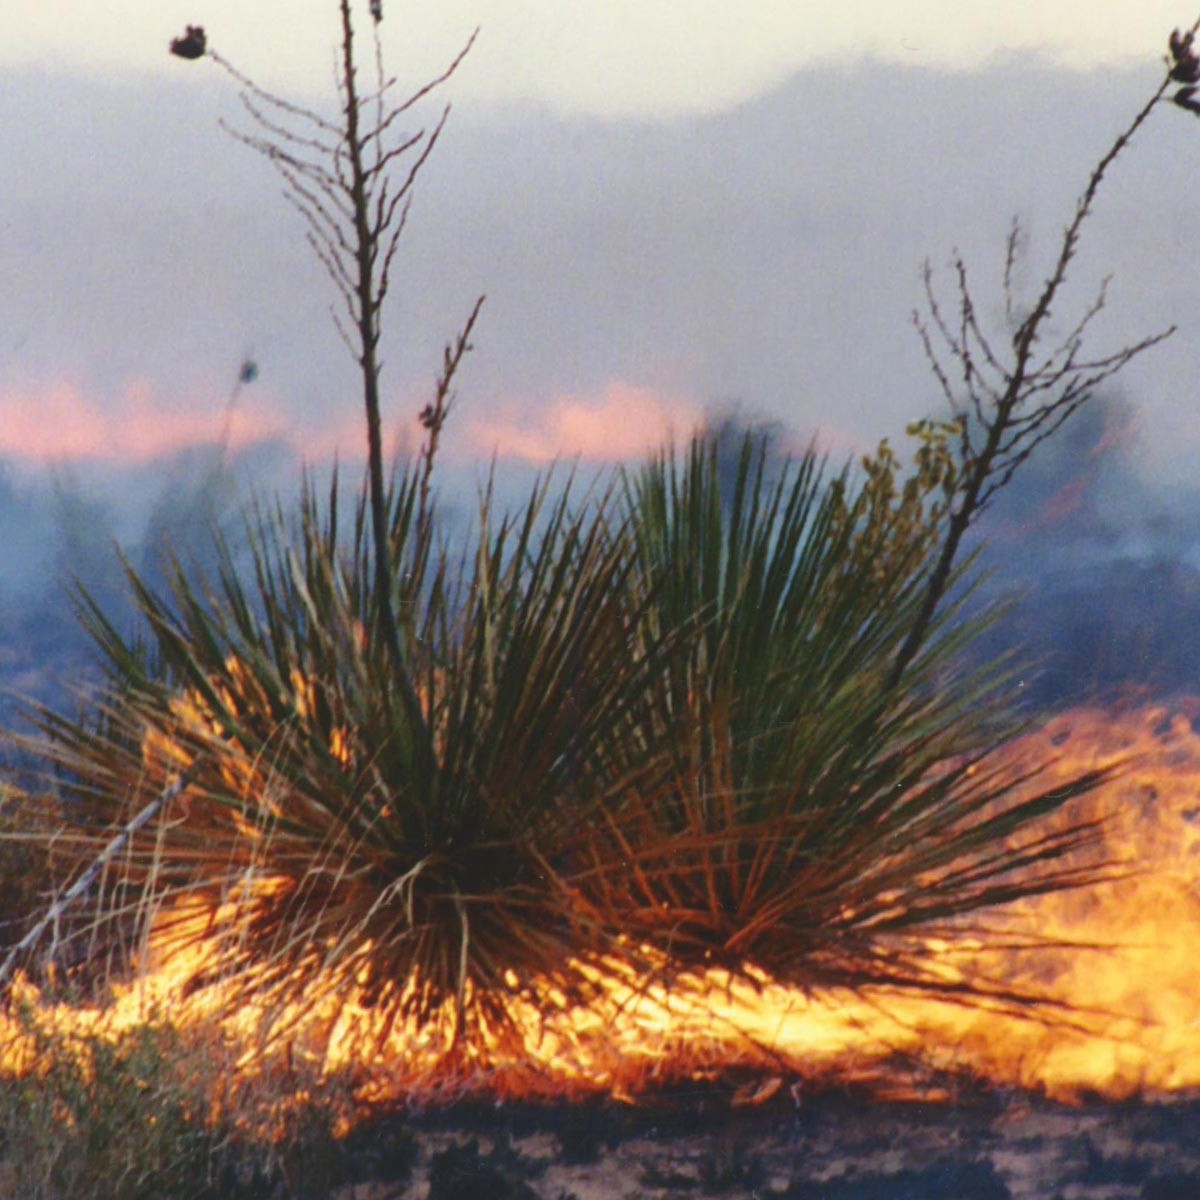 A burning yucca surrounded by blackened grass.